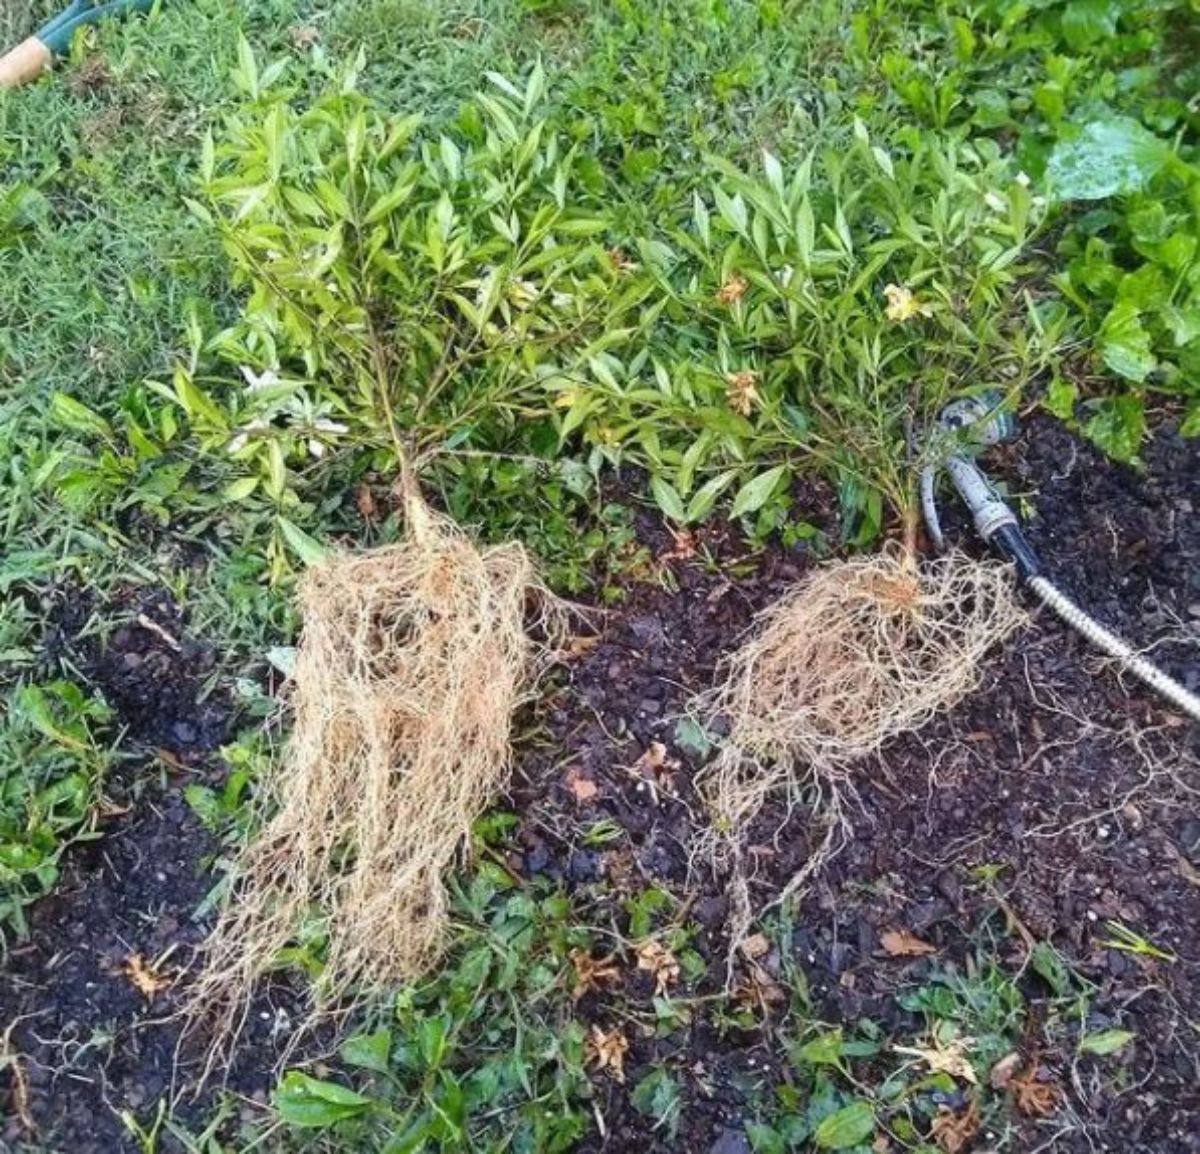 washed roots of gardenia, ready to transplant in the garden